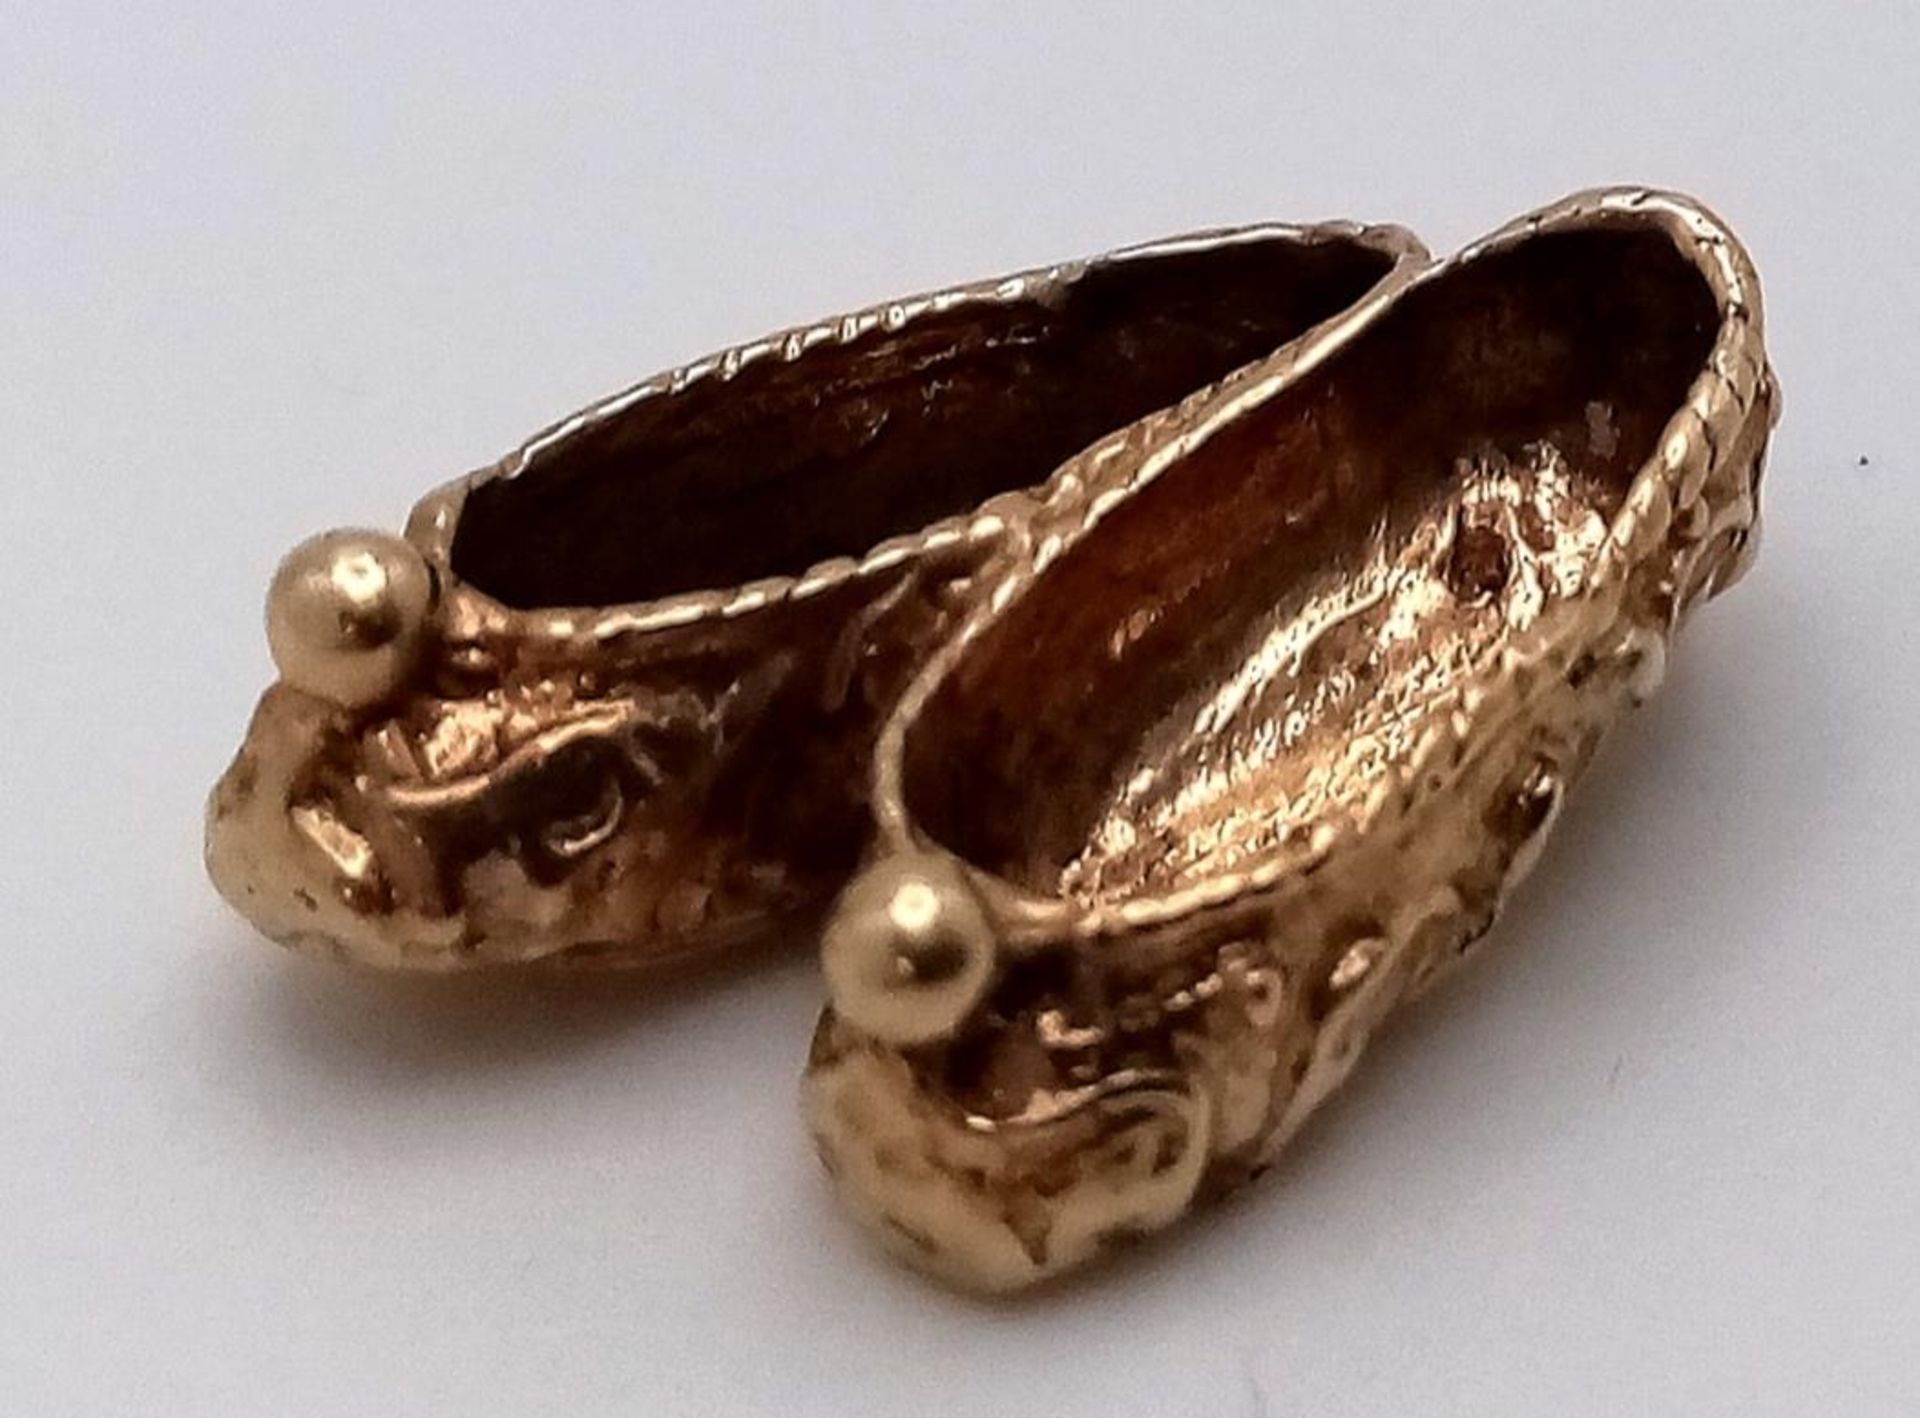 A Pair of 9K Yellow Gold Slippers Pendant/Charm. 22mm. 3.1g weight.